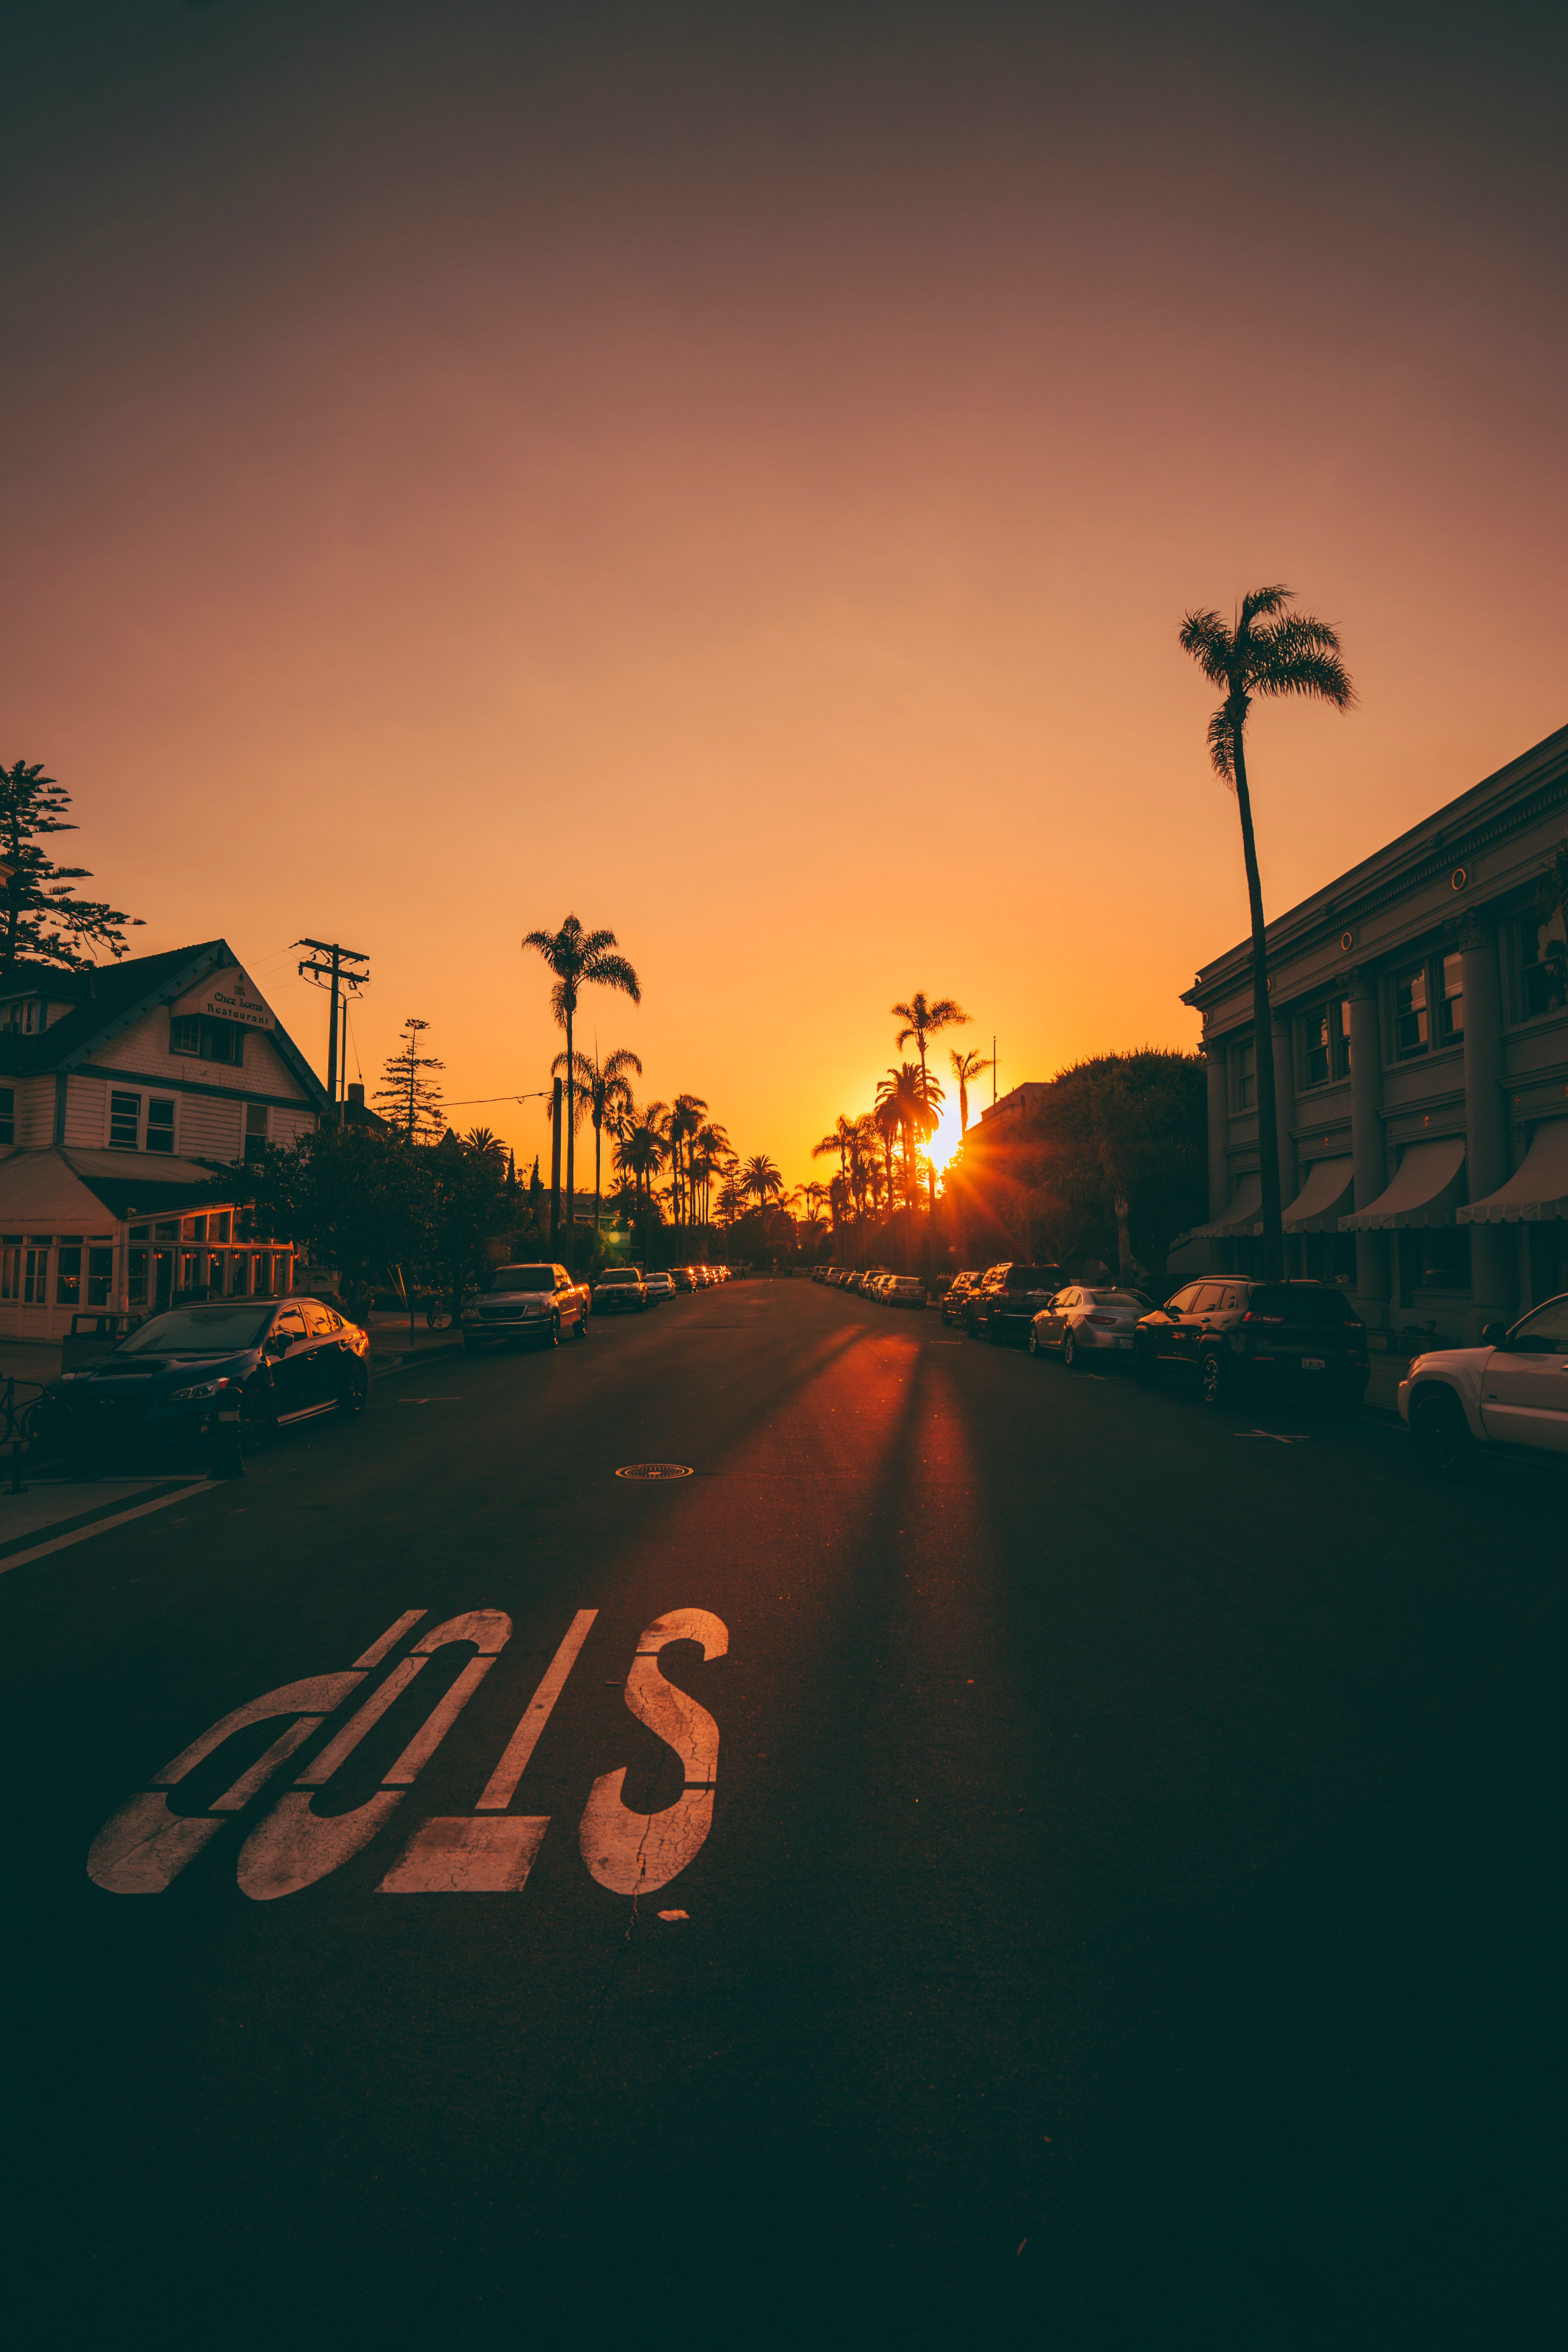 cars, cities, road, palms, street, sunset, markup lock screen backgrounds